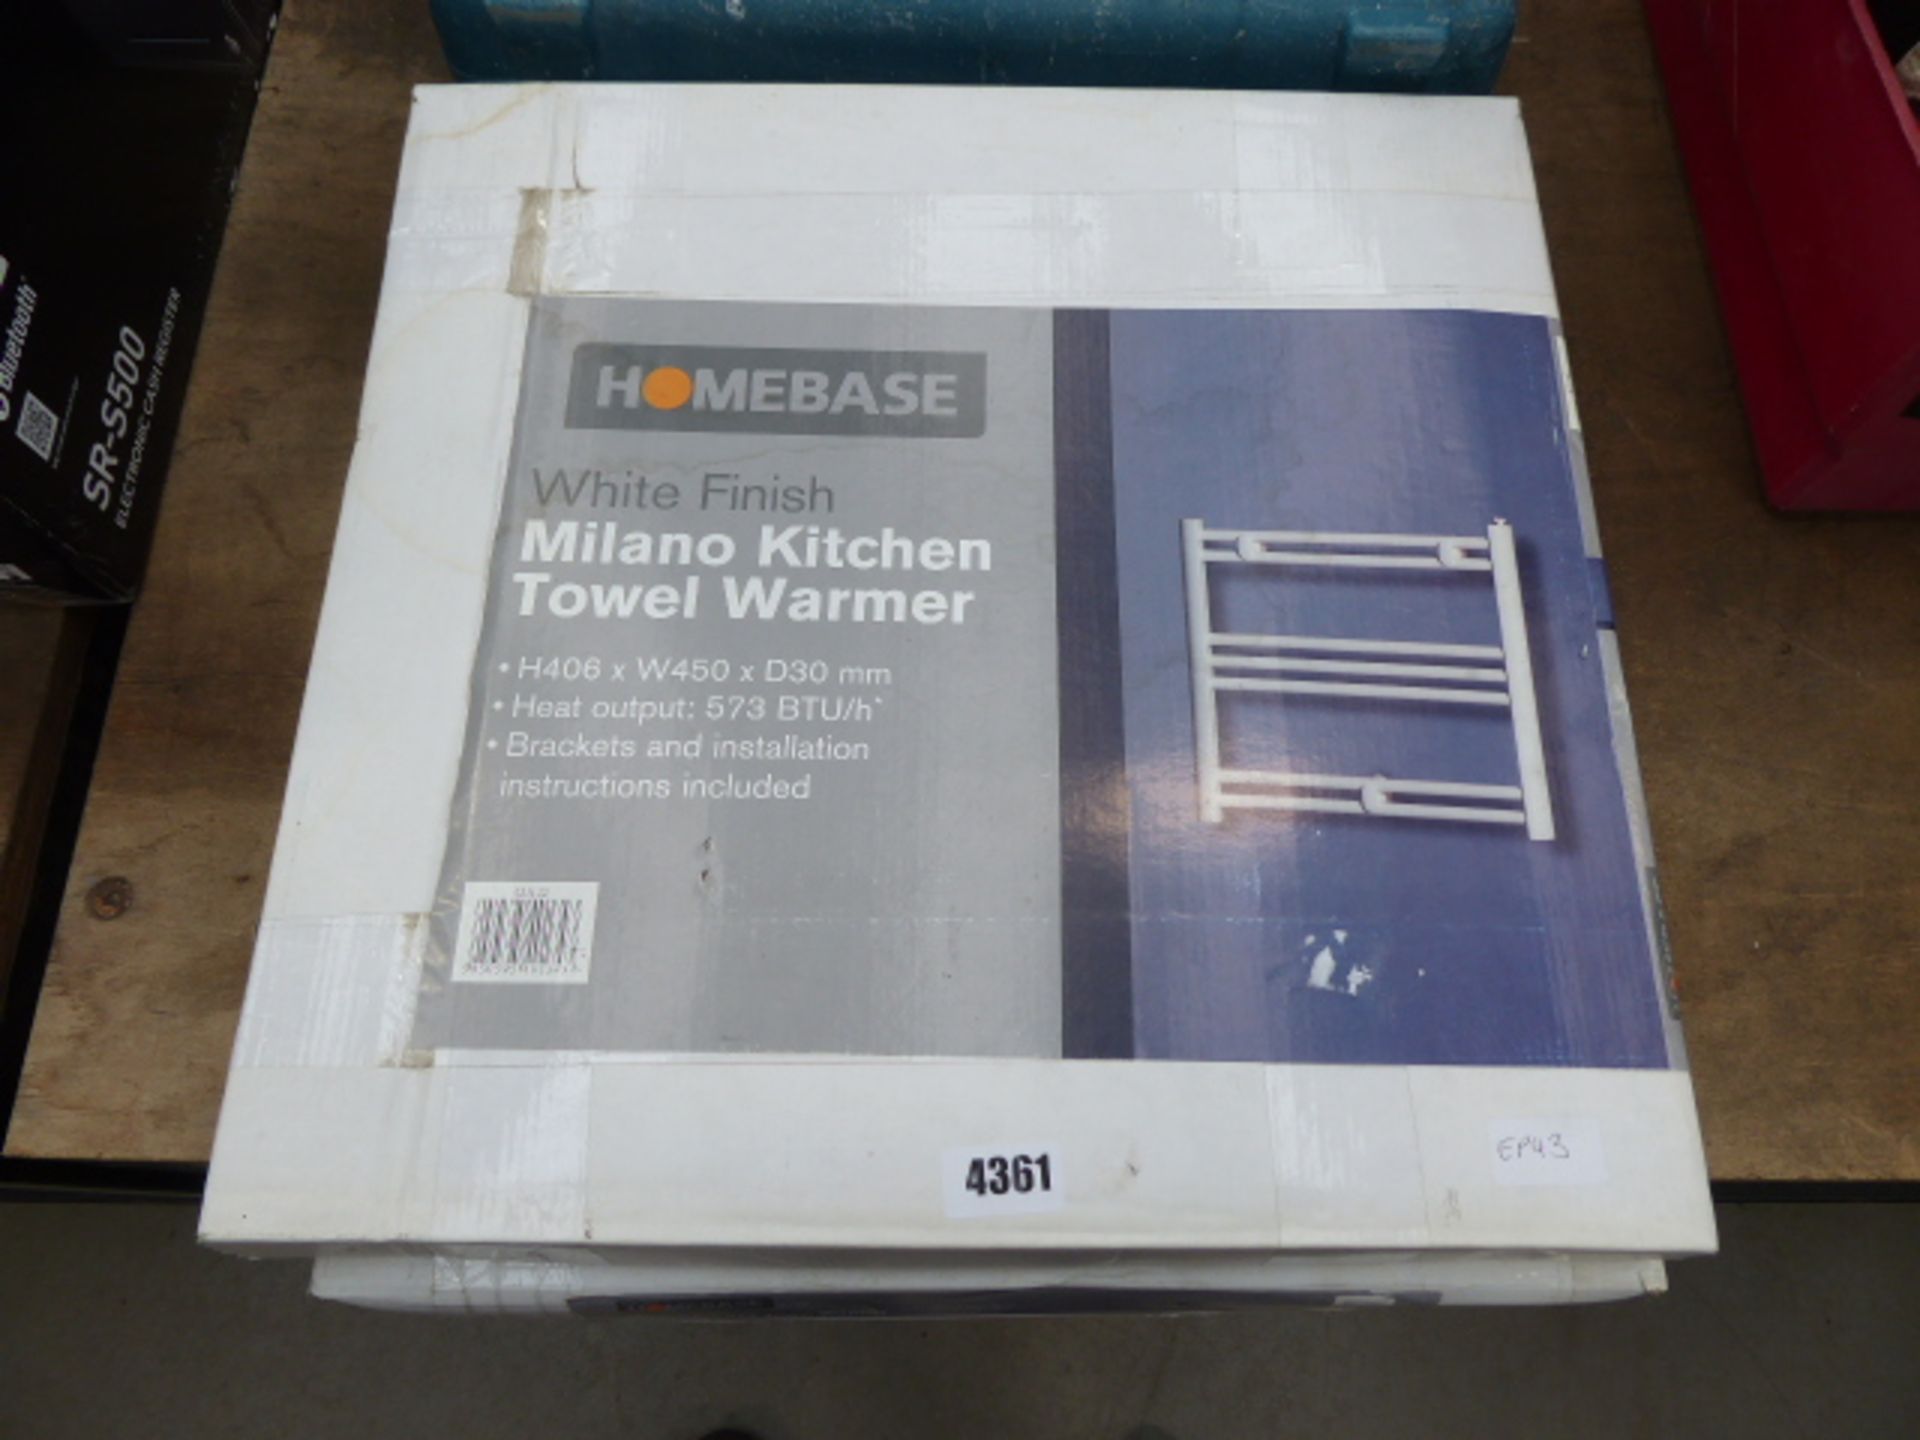 Pair of Homebase white finish kitchen towel warmers